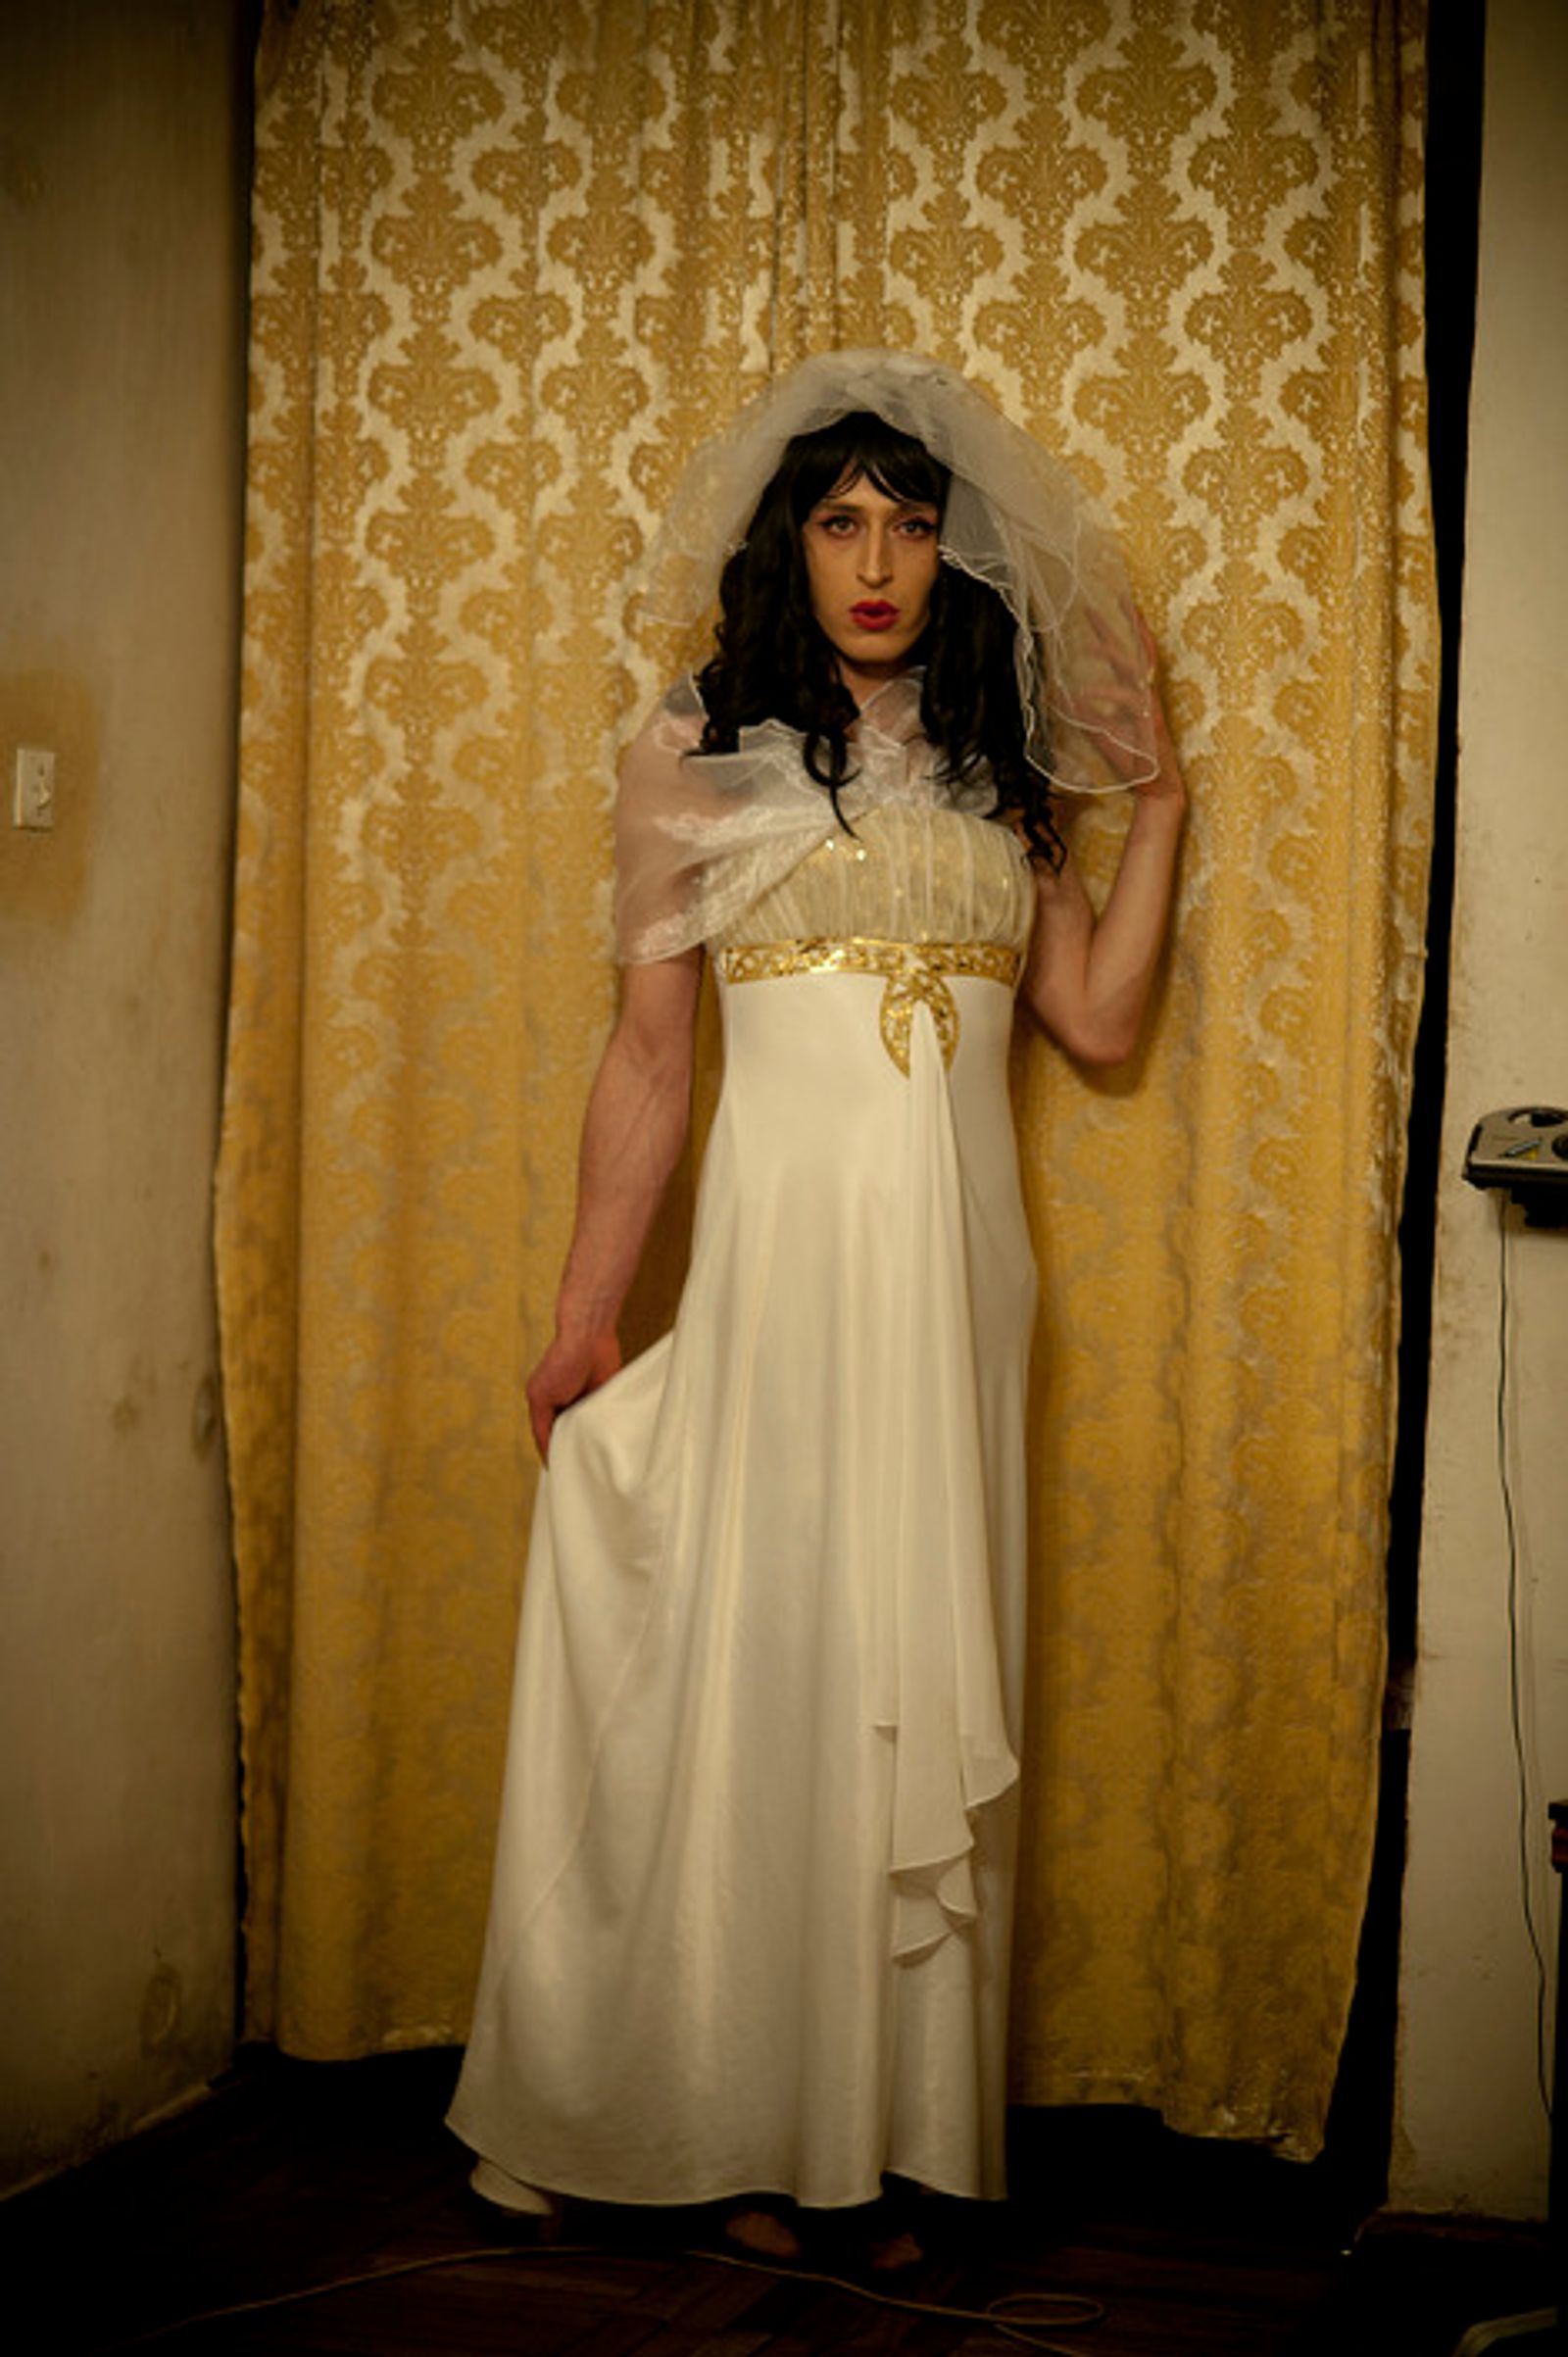 © Nazik Armenakian - Image from the Transgenders photography project